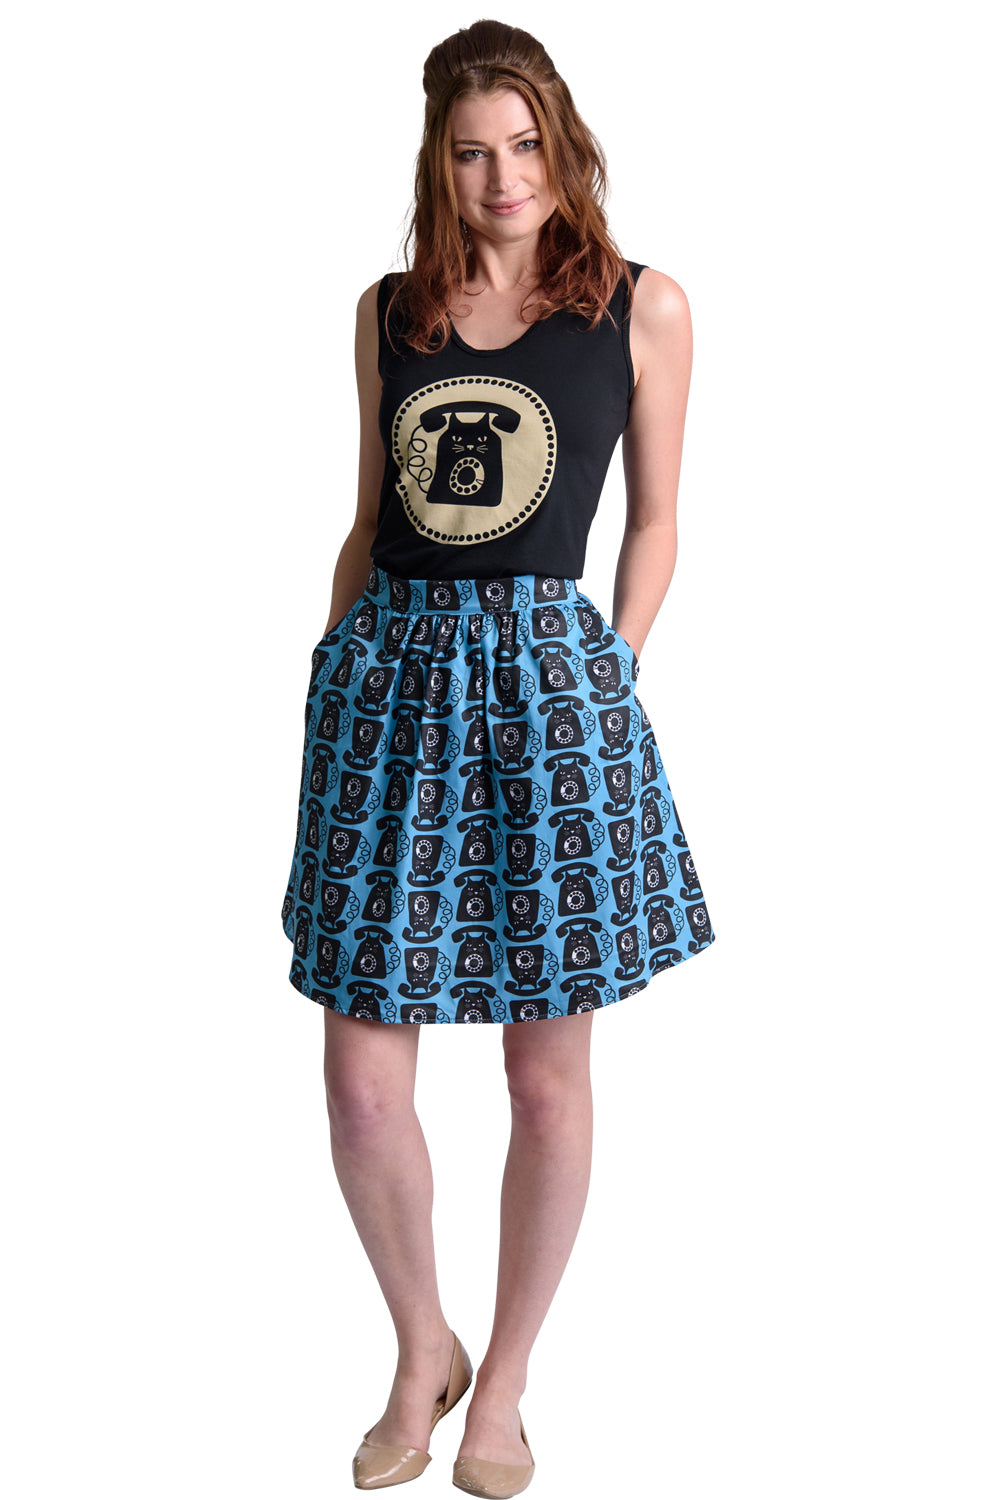 Aqua blue black and white gathered cat phone print short skirt with pockets, paired with a cute tshirt